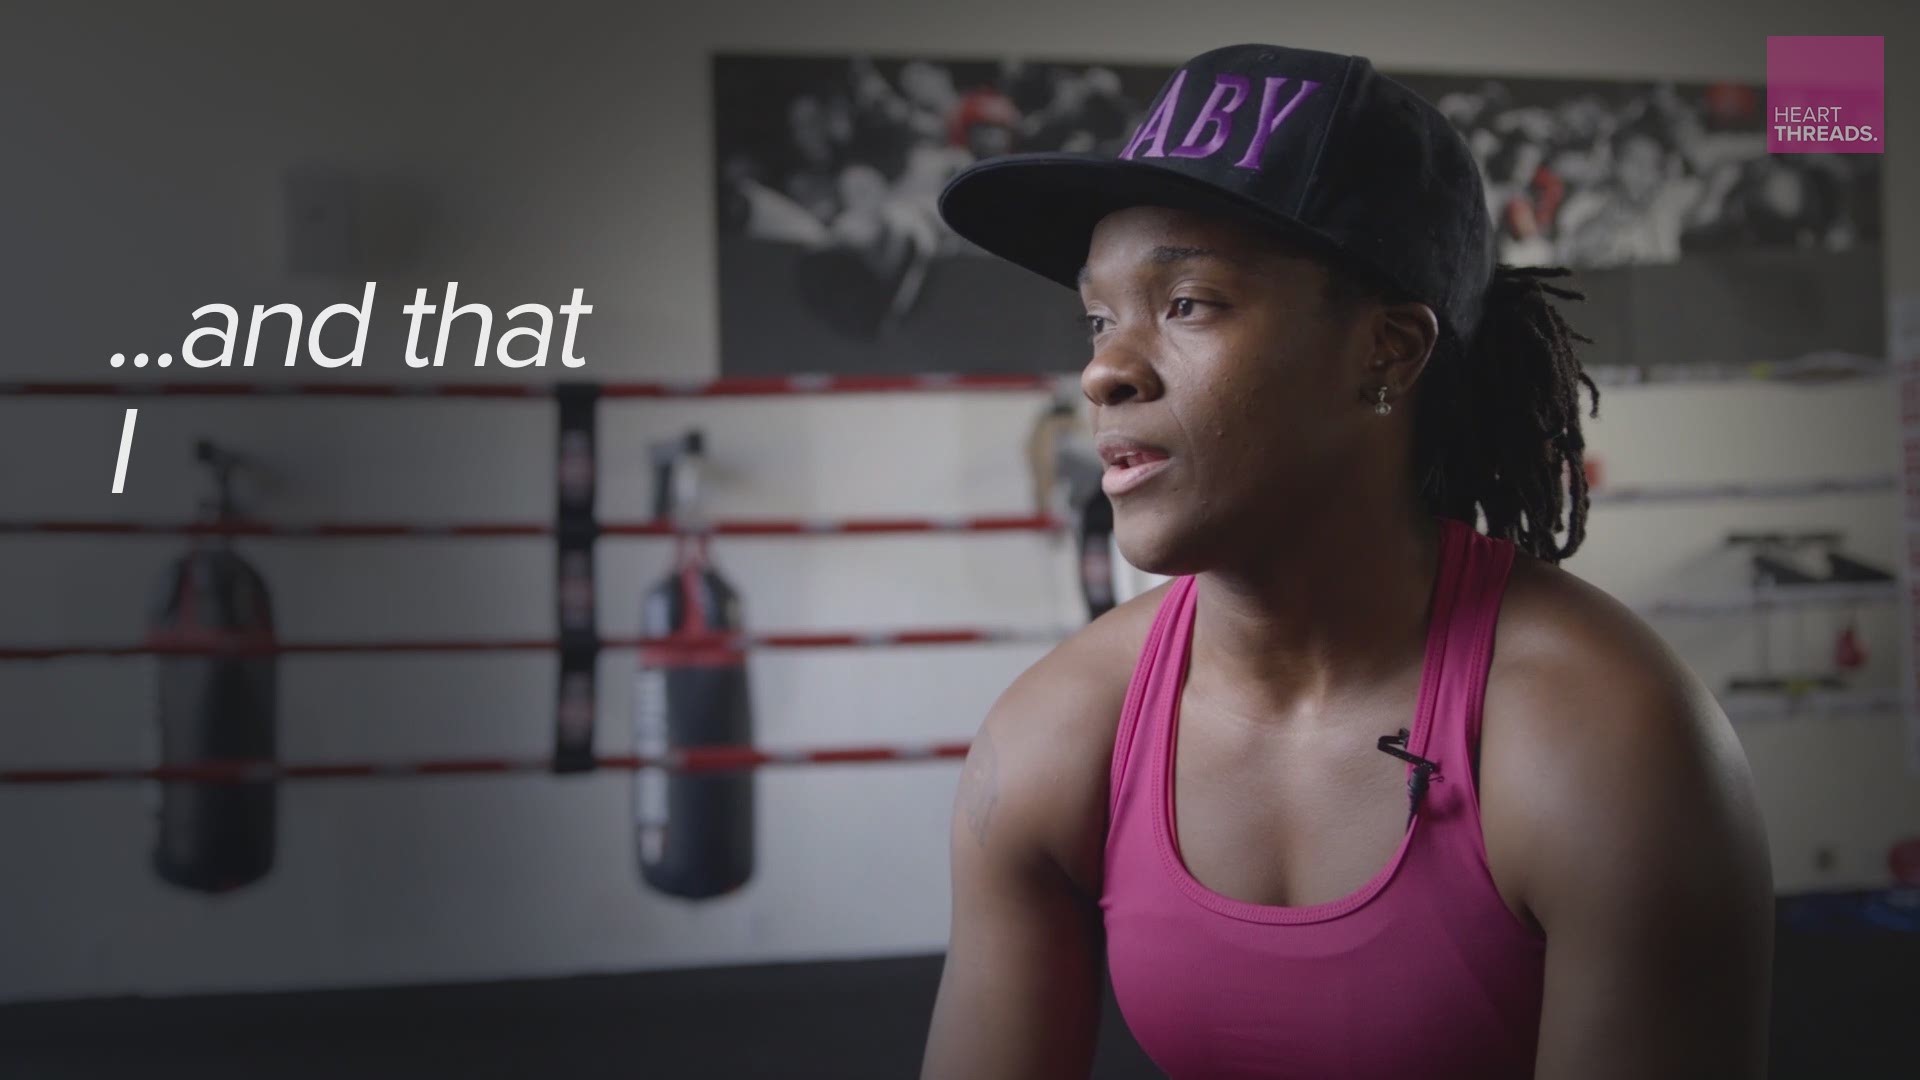 Tiara is a police officer in some of D.C.'s toughest neighborhoods. She's also a world champion boxer. Whether she's in the ring or in uniform, her commitment to her community redefines expectations for police officers and boxers alike.